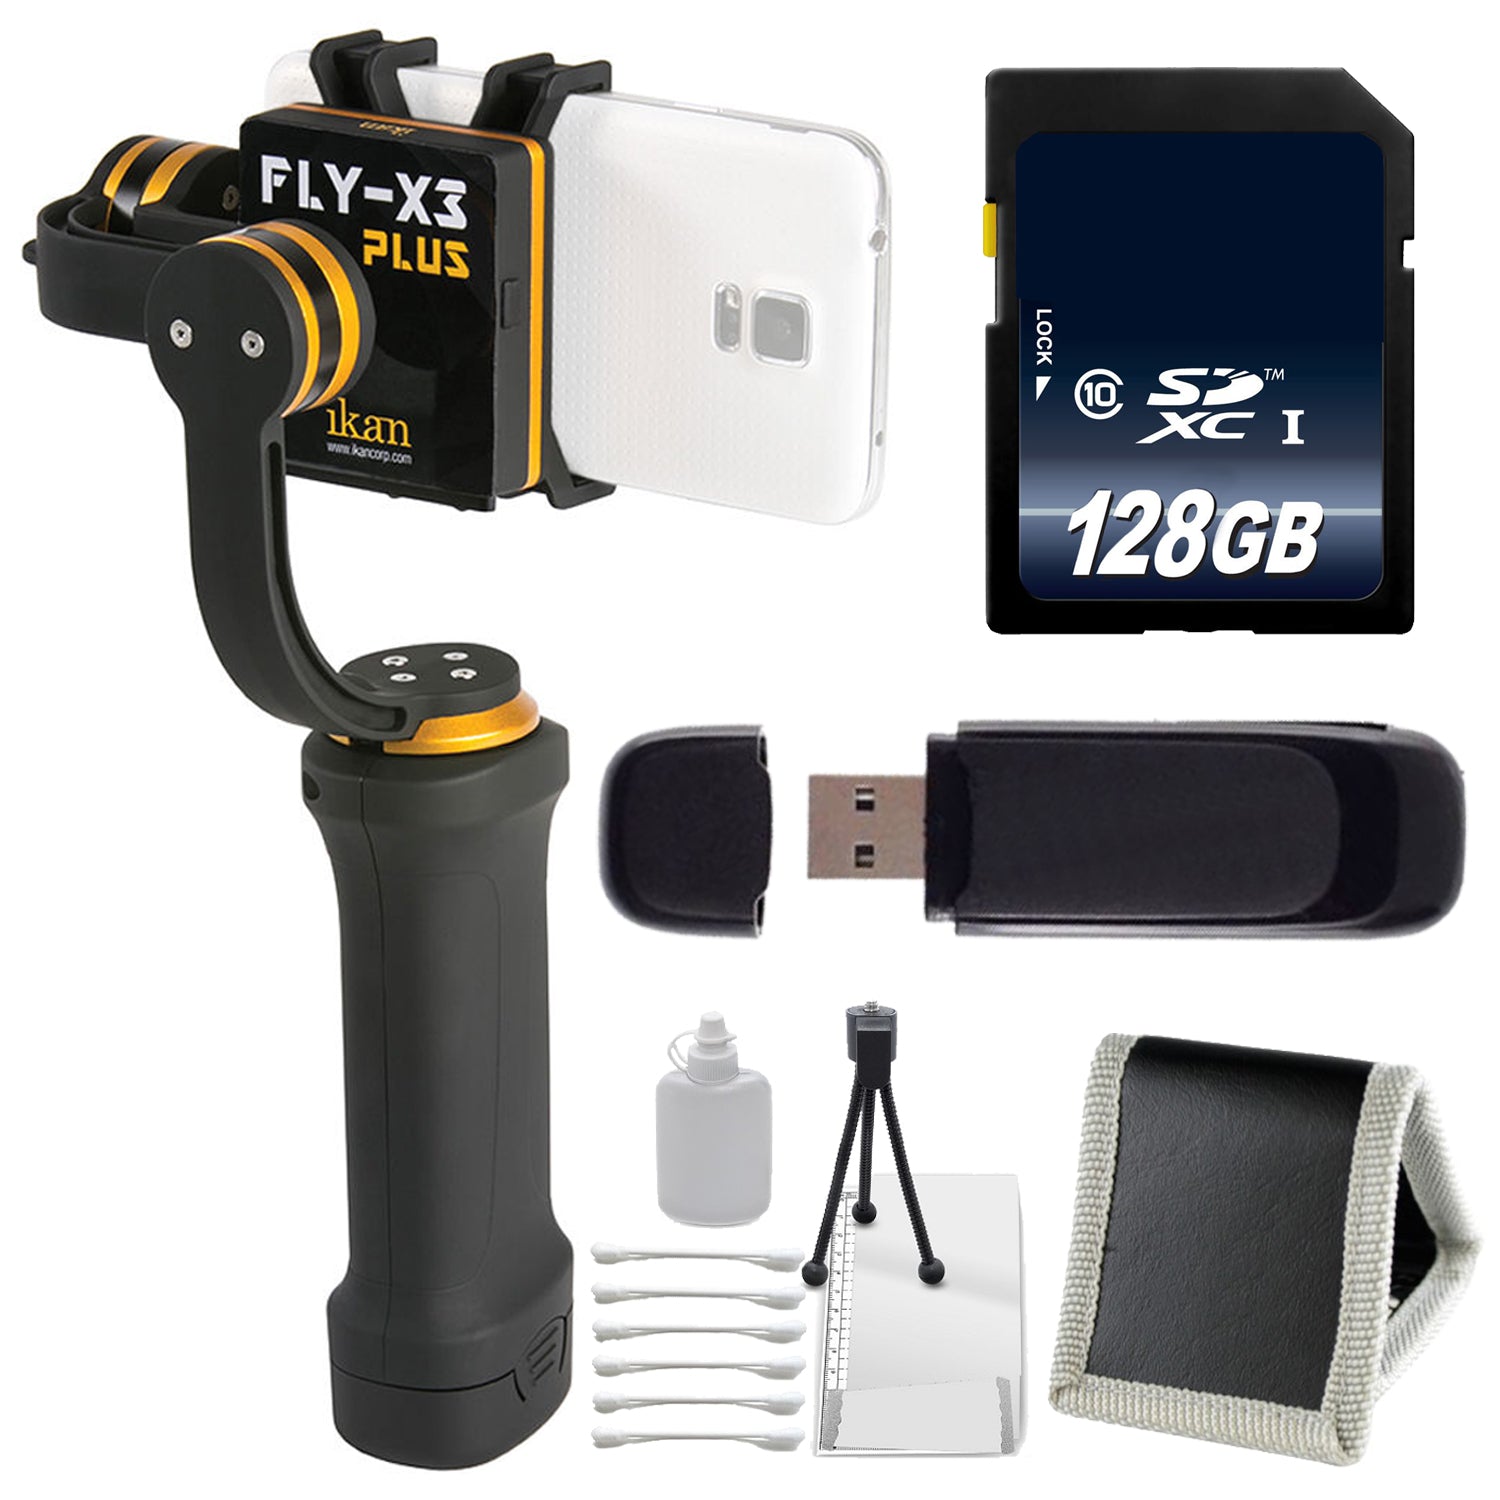 ikan FLY-X3-Plus 3-Axis Smartphone Gimbal Stabilizer with GoPro Mount + 128GB SDXC Memory Card + SD Card USB Reader Bundle